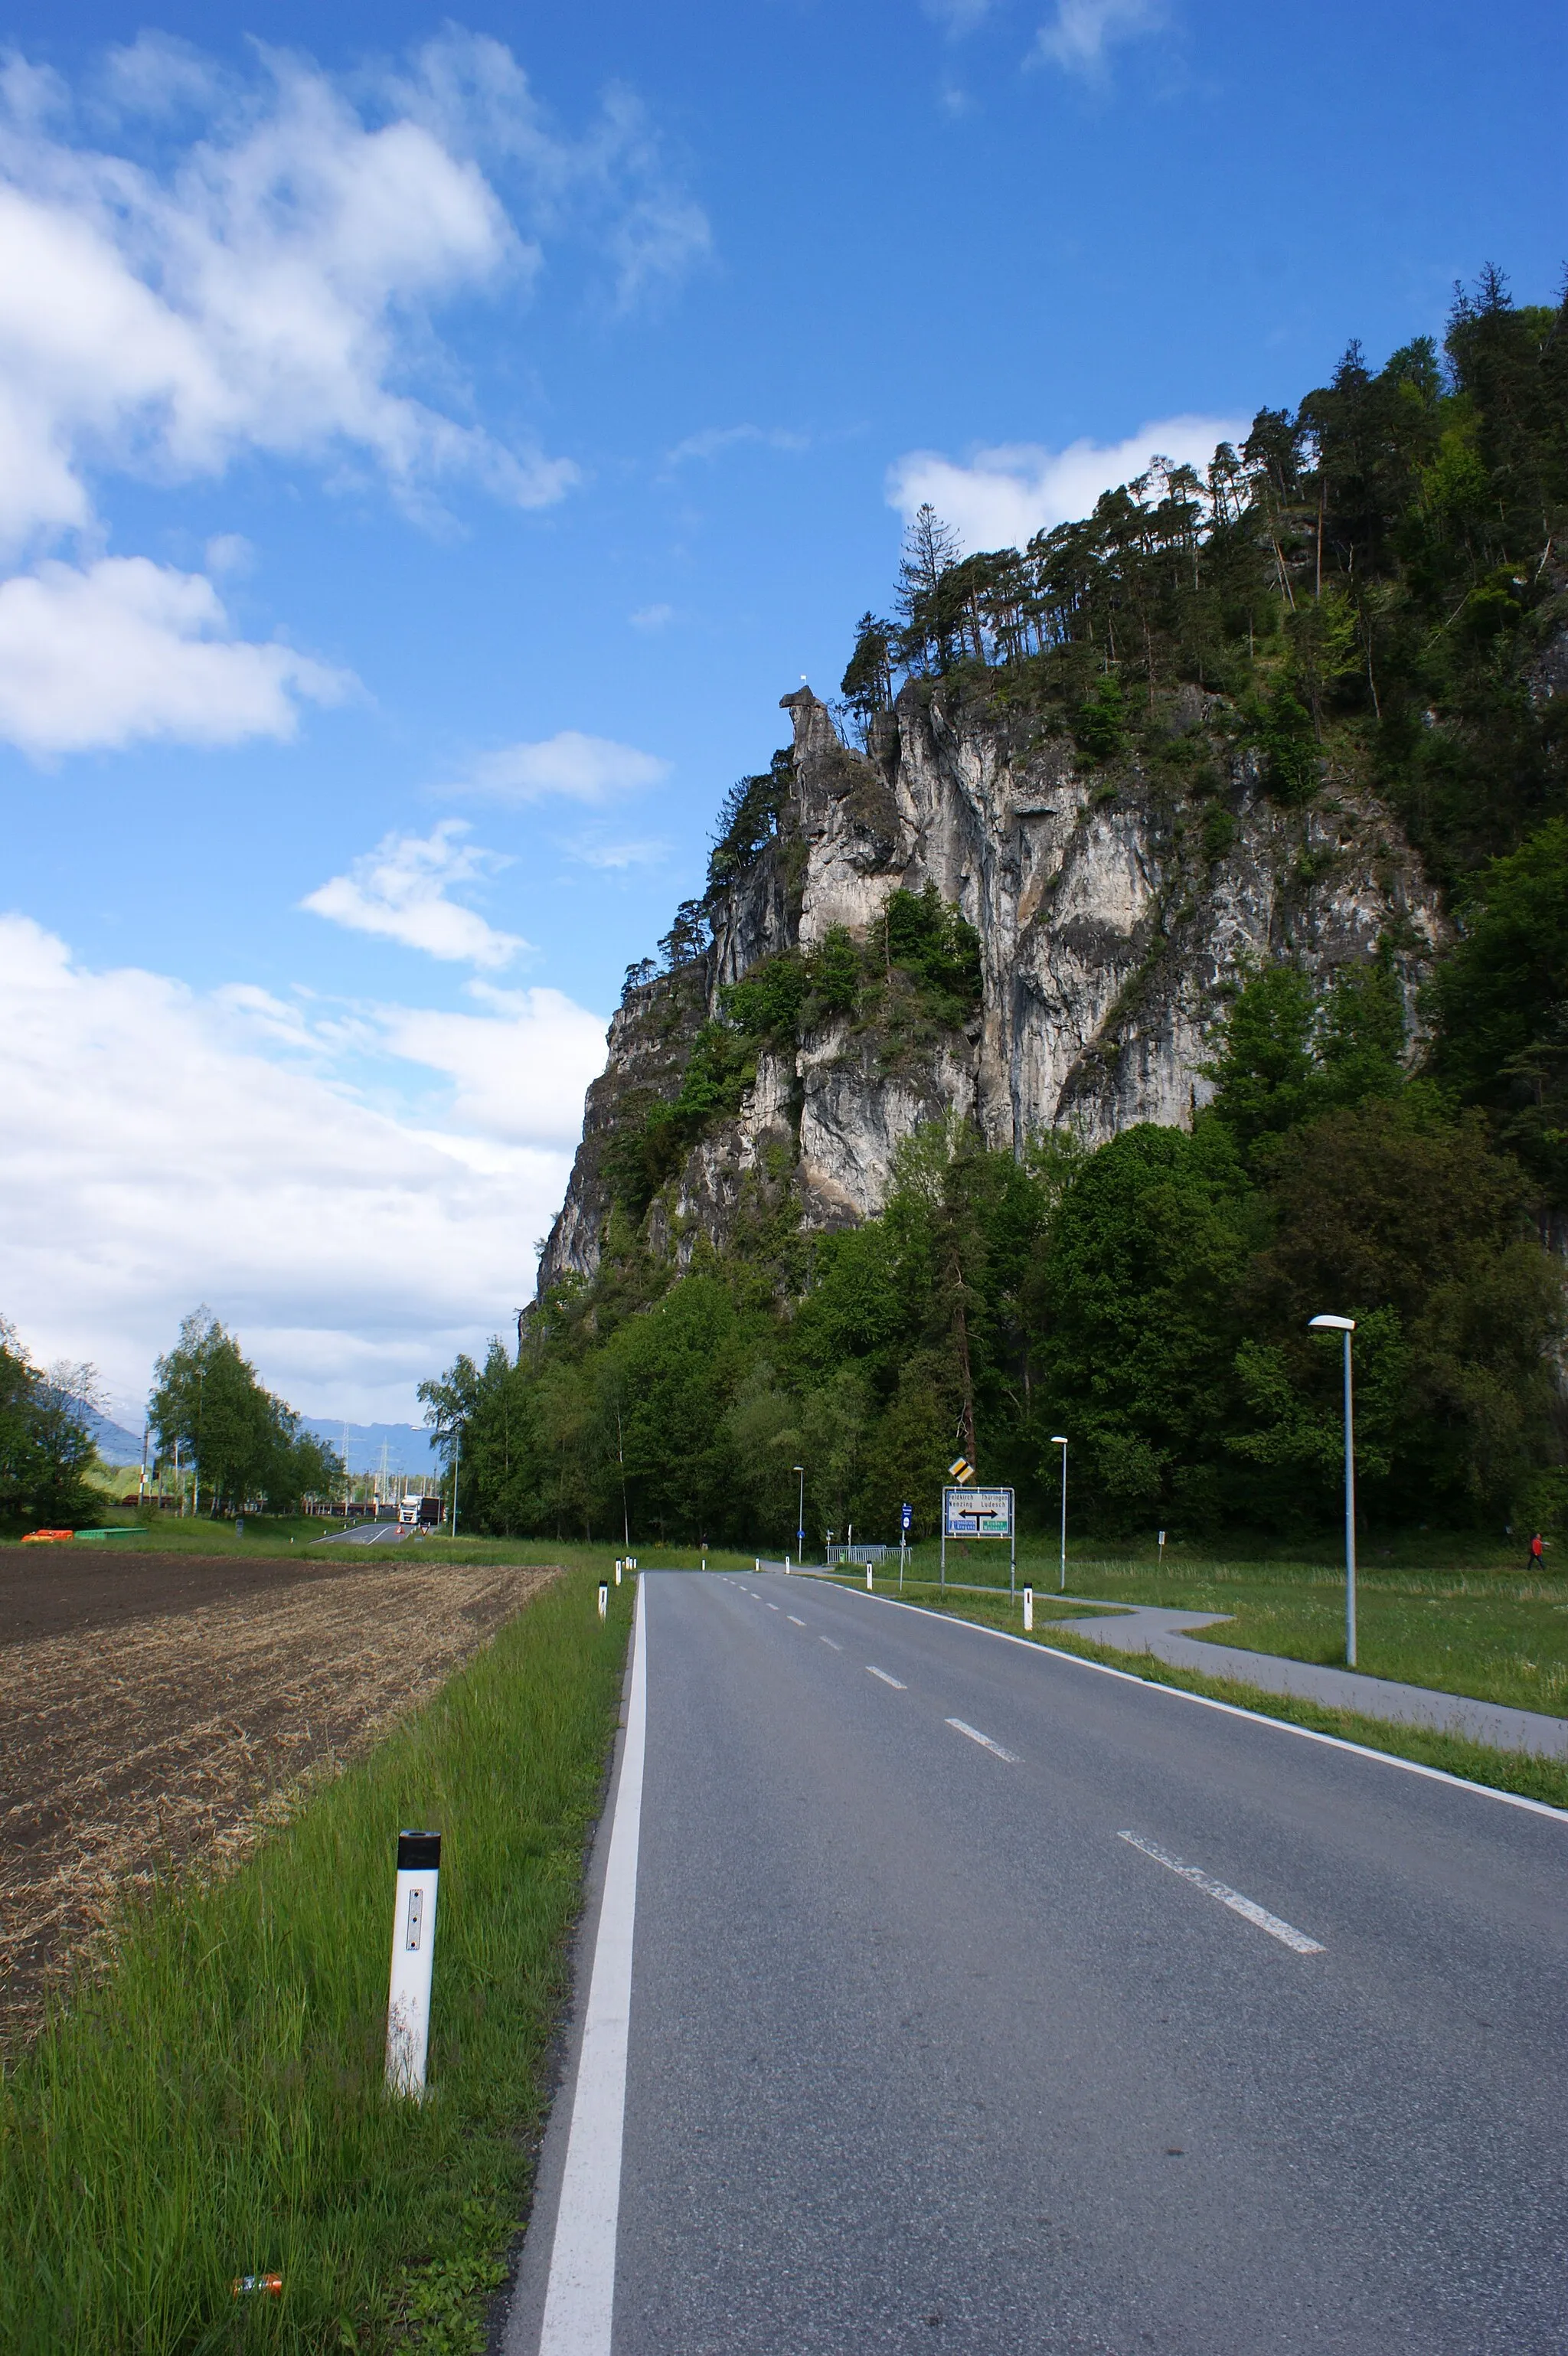 Photo showing: The "Hangender Stein" (meaning: "hanging stone") is a rock formation on the border between the communities Ludesch and Nüziders.